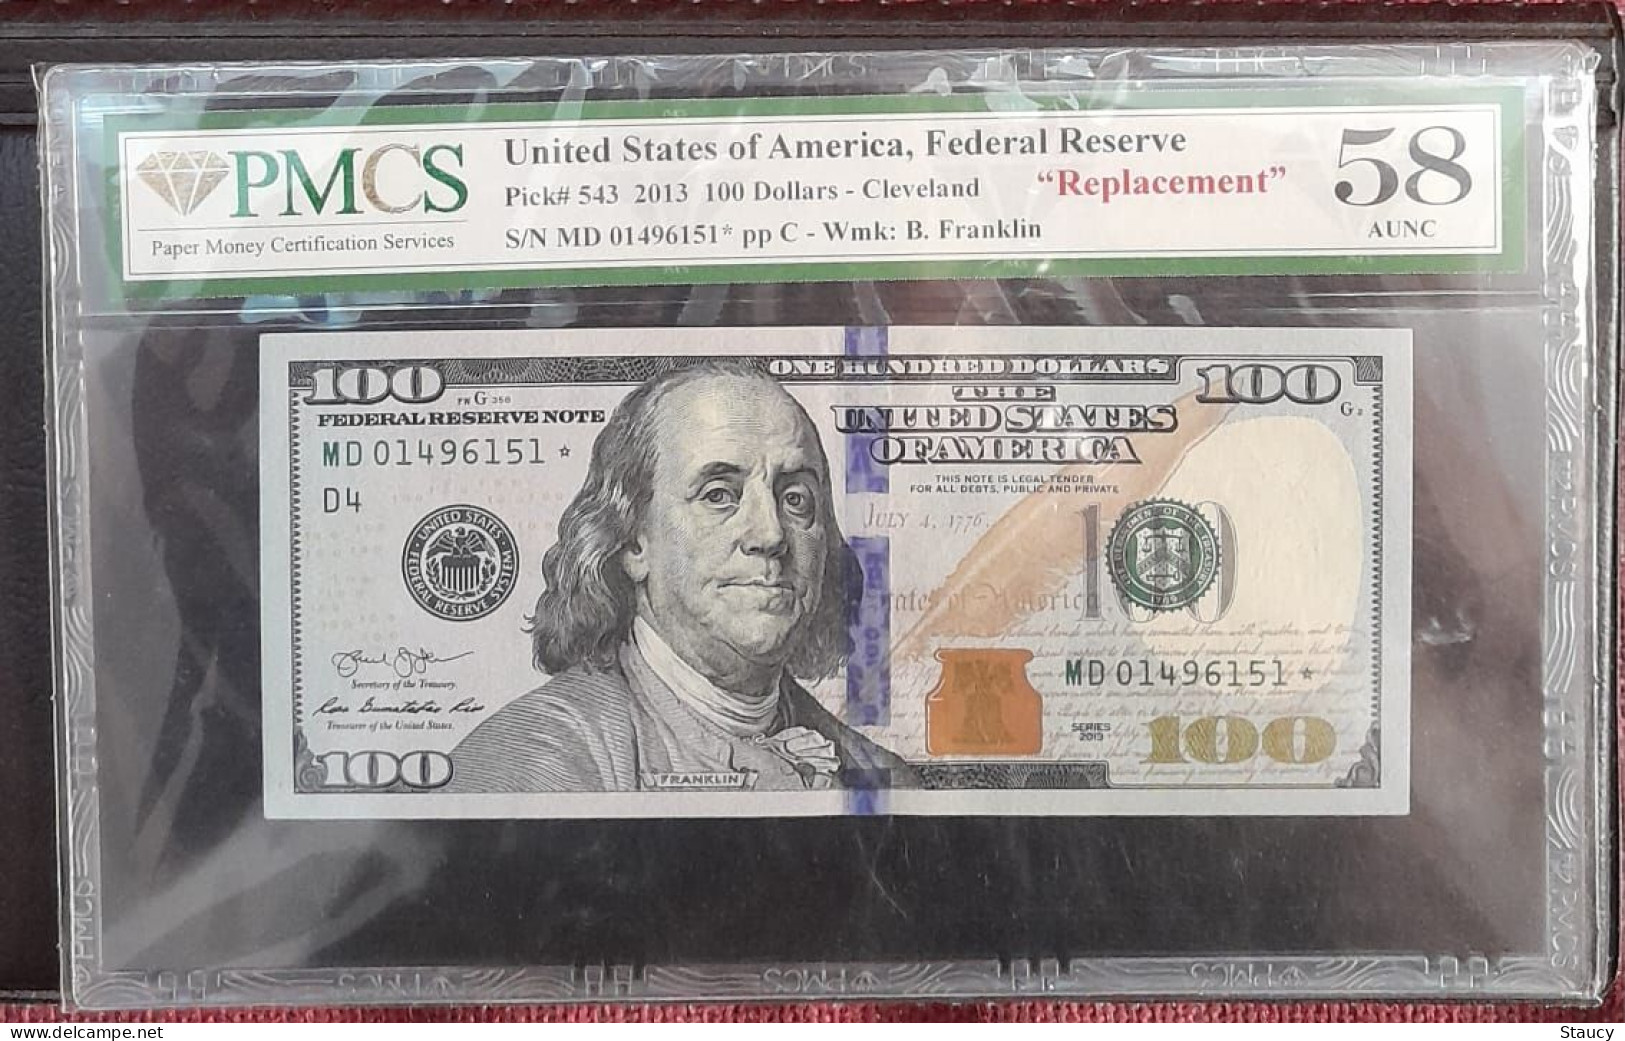 United States Of America USA 2013 $100 Dollars Cleveland "REPLACEMENT" Note K Franklin, AUNC 58 Stamped MD01496151 * D4 - Federal Reserve Notes (1928-...)